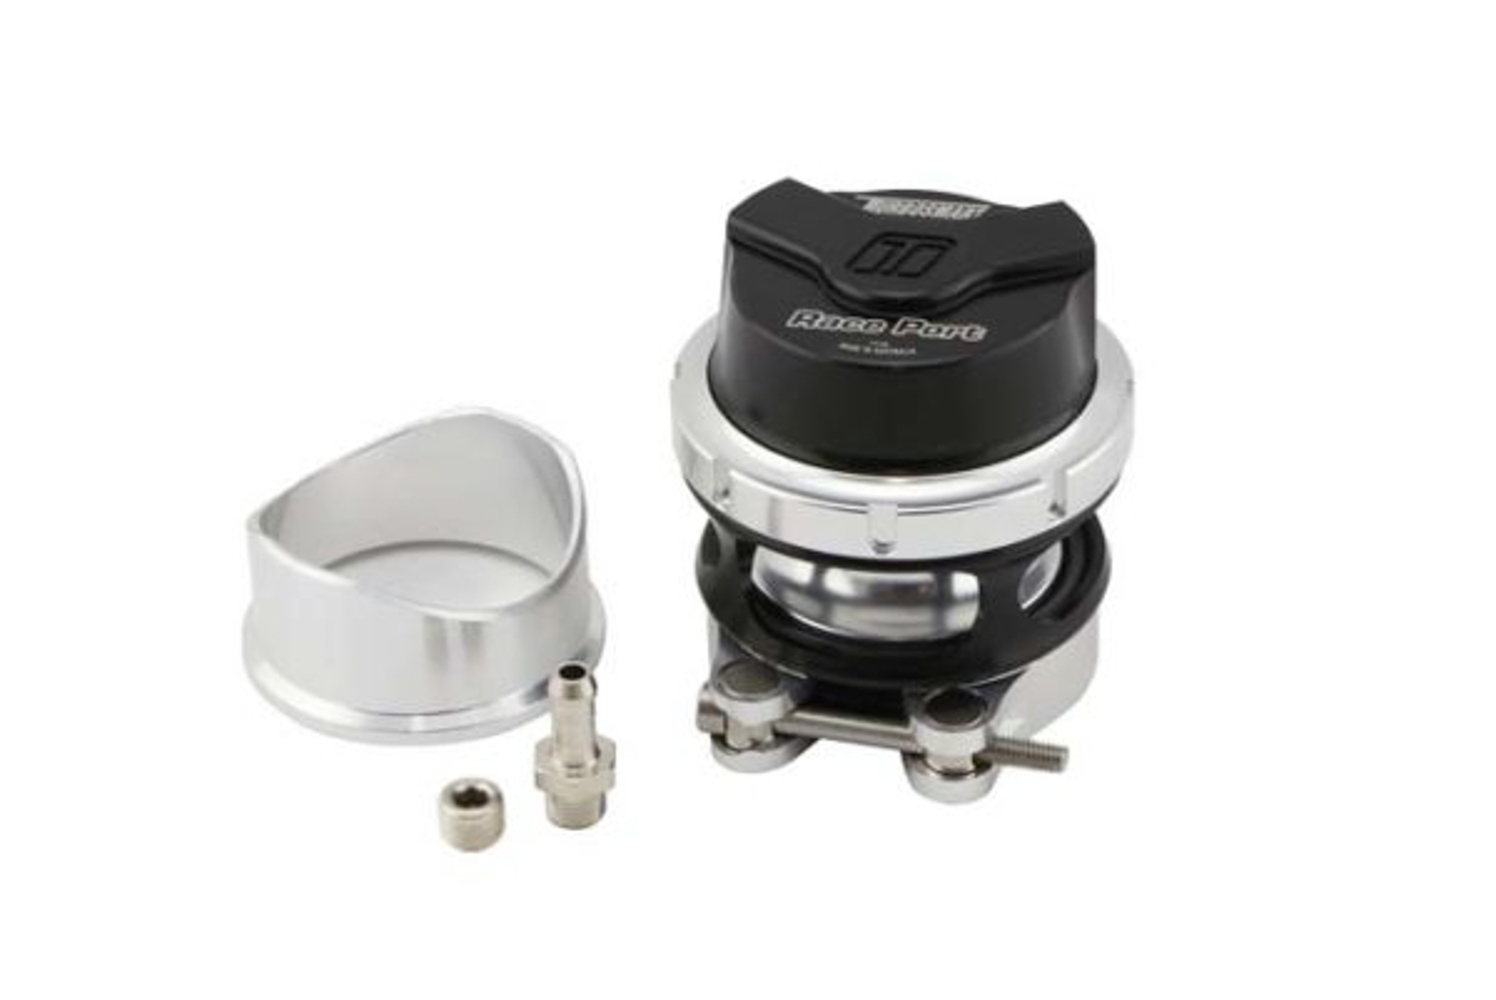 Turbosmart TS-0204-1132 Blow-Off Valve, RacePort Pro, Clamp / Flange Included, Aluminum, Black / Clear Anodized, Universal, Each